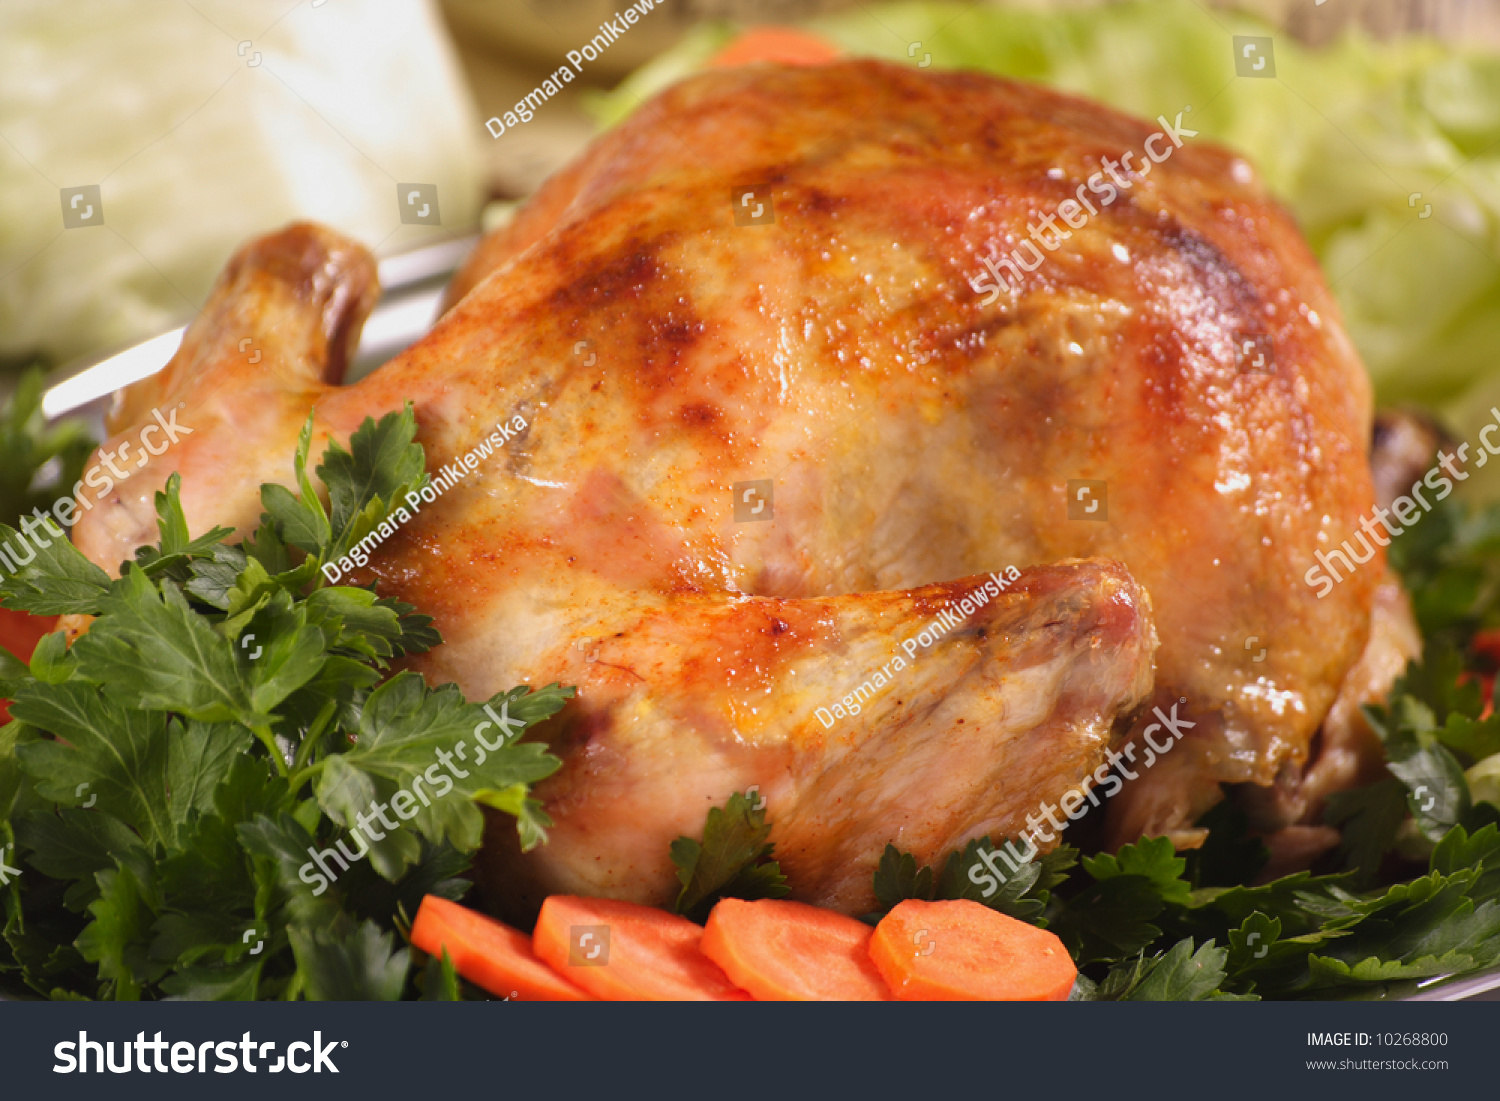 Roast Chicken On Plate With Vegetable Stock Photo 10268800 : Shutterstock